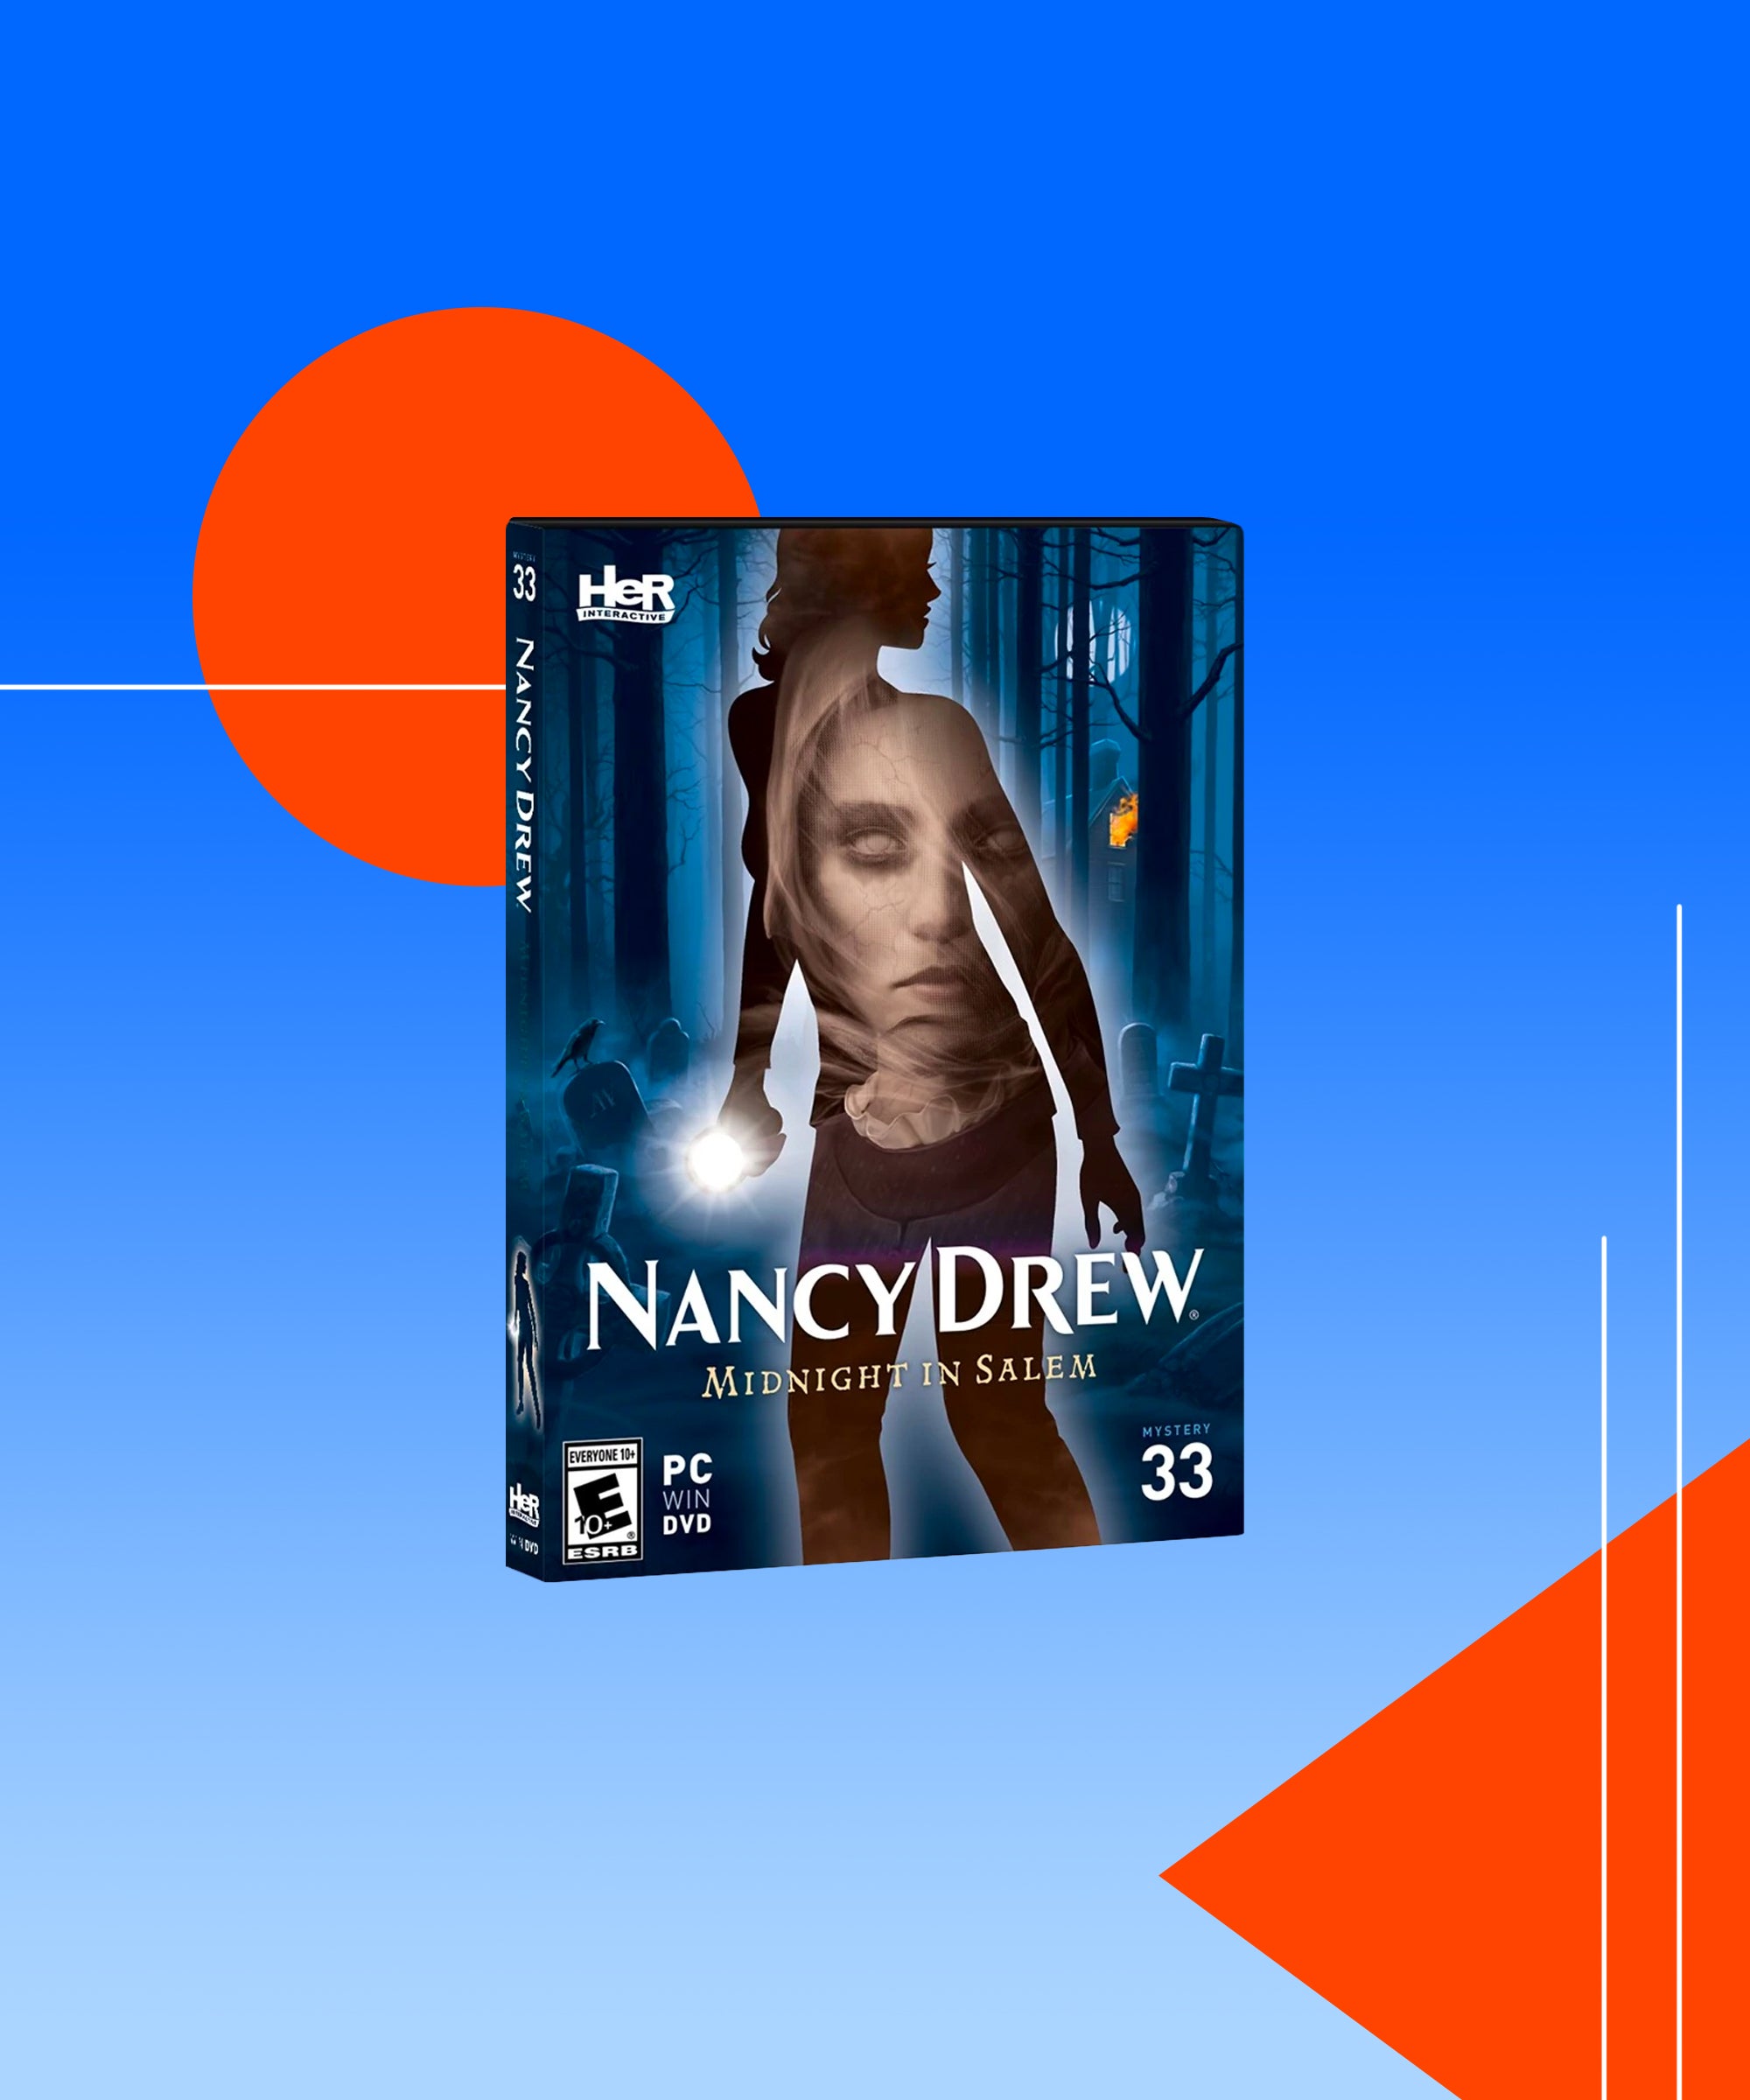 what is the newest nancy drew game